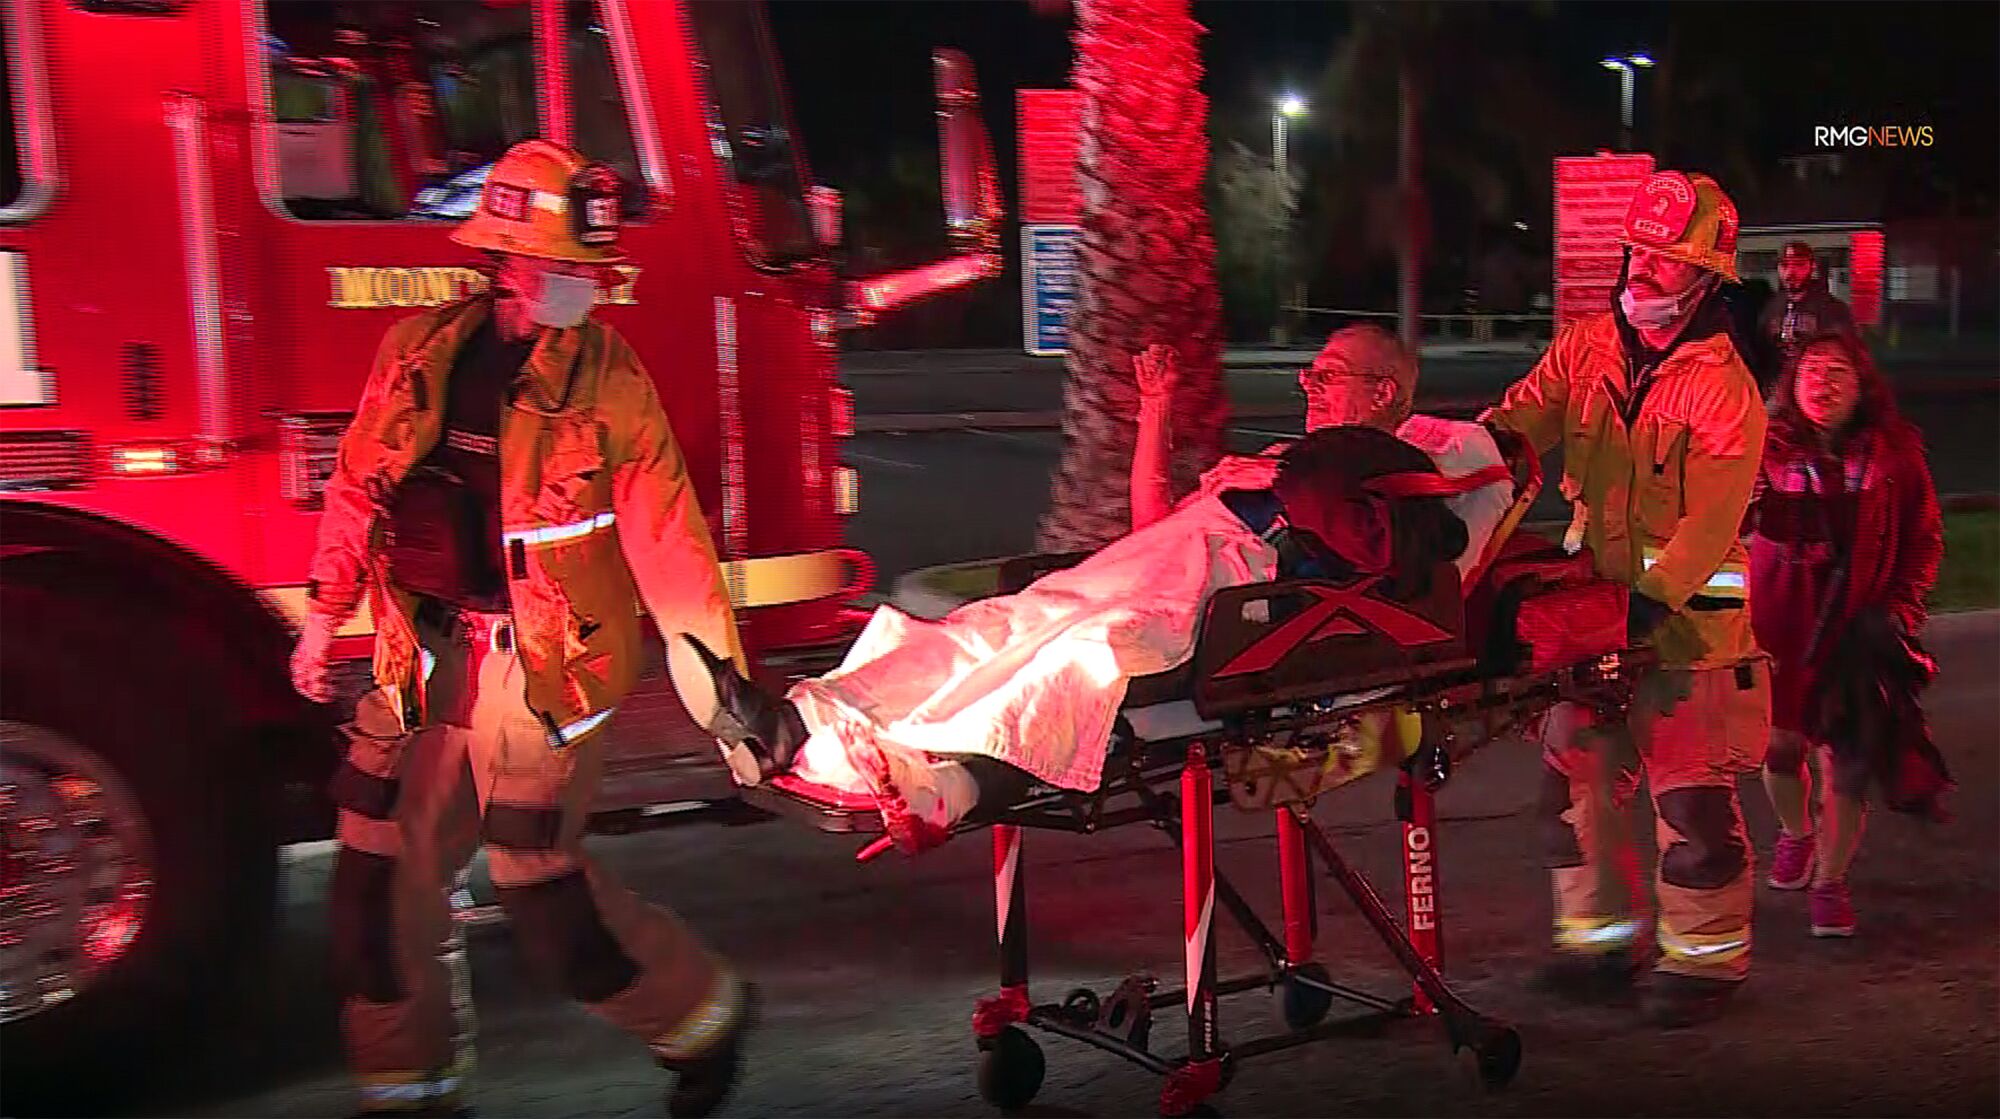 Firefighters attend to victims injured during a mass shooting.